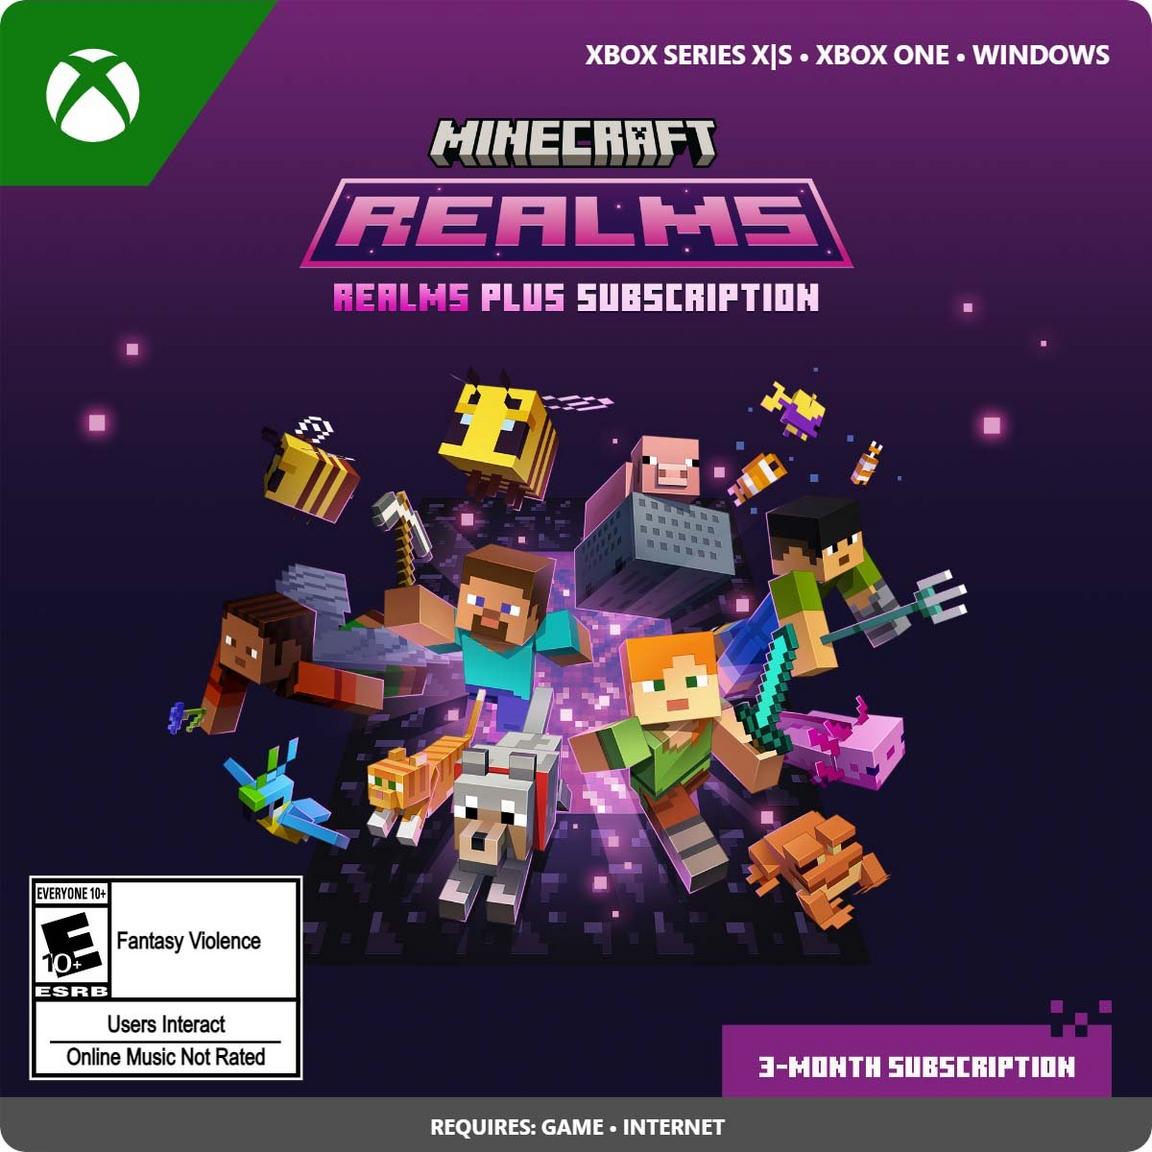 Microsoft Minecraft Realms Plus 3-Month Subscription - Xbox One, Xbox Series X/S, and Windows -  7LM-00049